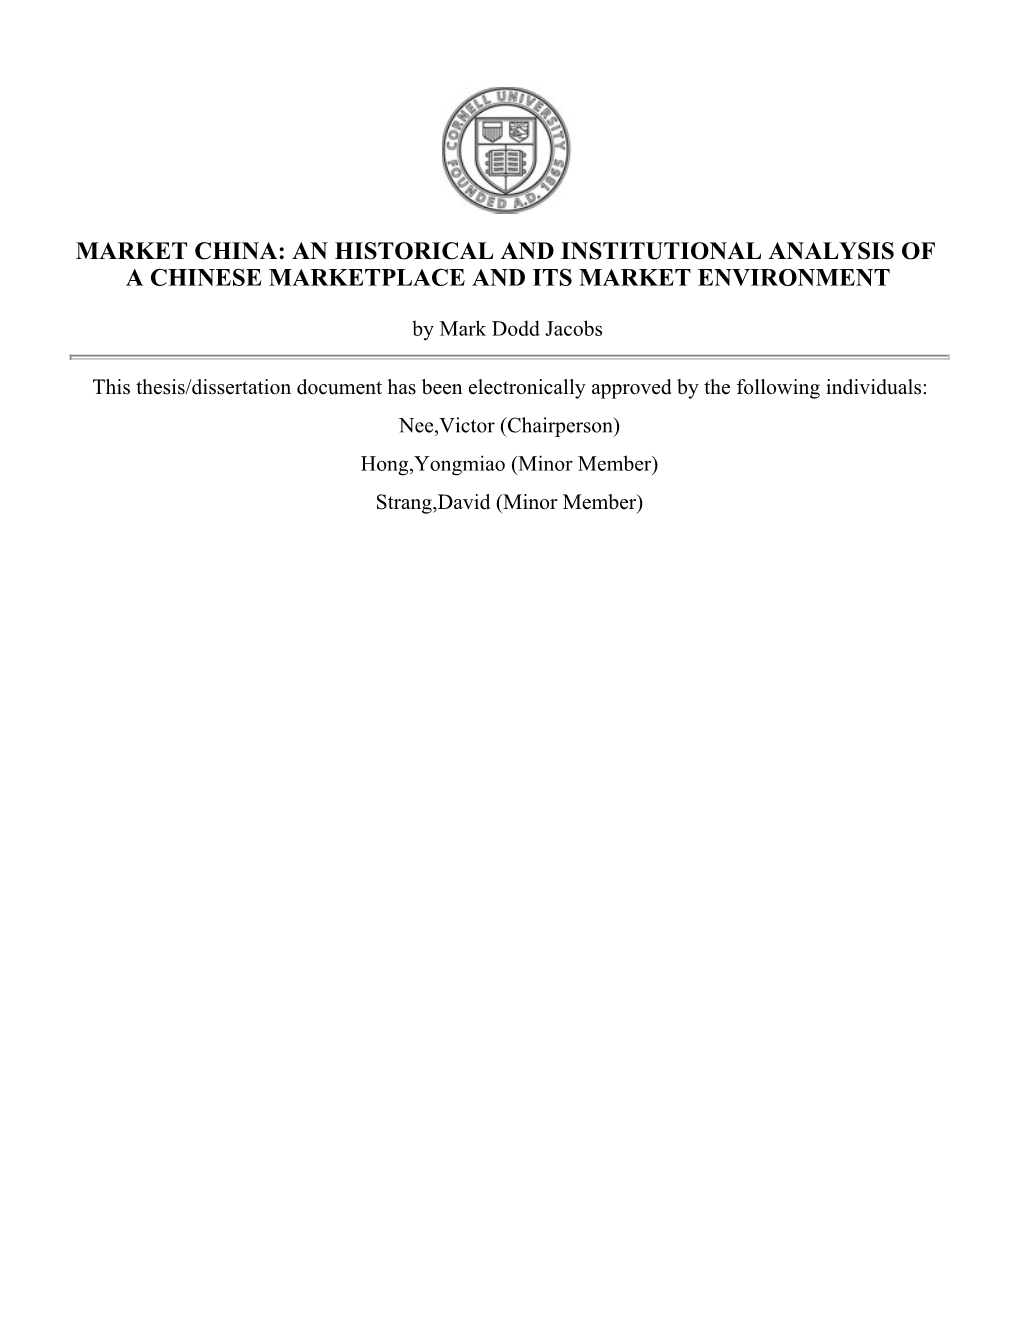 Market China: an Historical and Institutional Analysis of a Chinese Marketplace and Its Market Environment